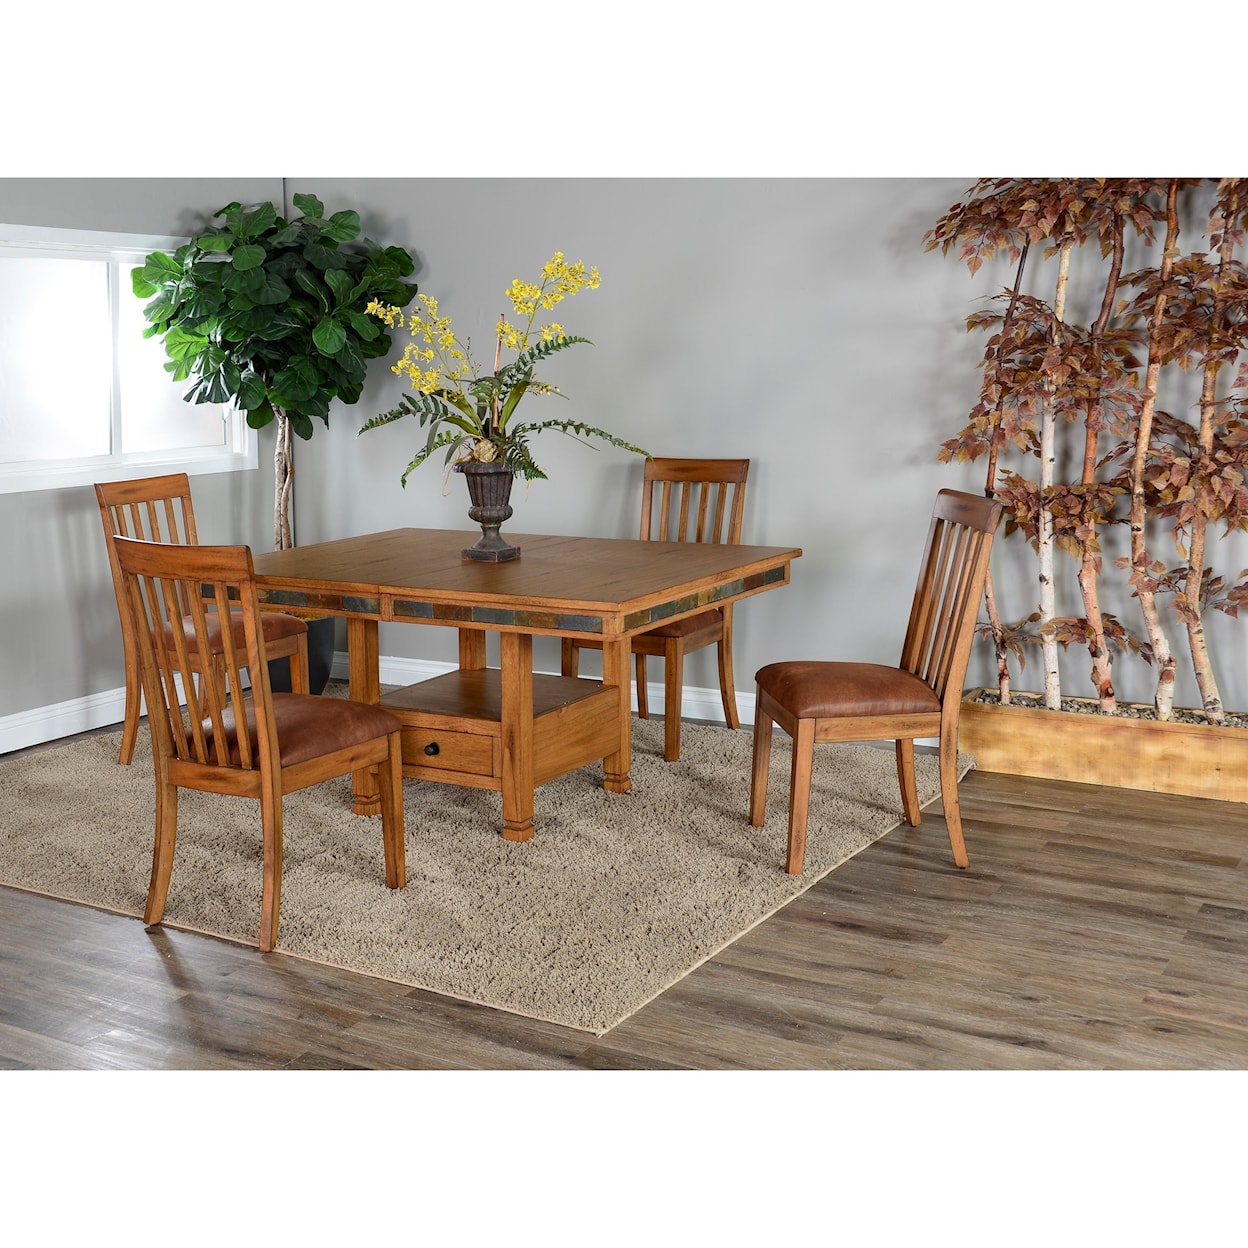 Sunny Designs Sedona 2 Dining Table and Chair Set